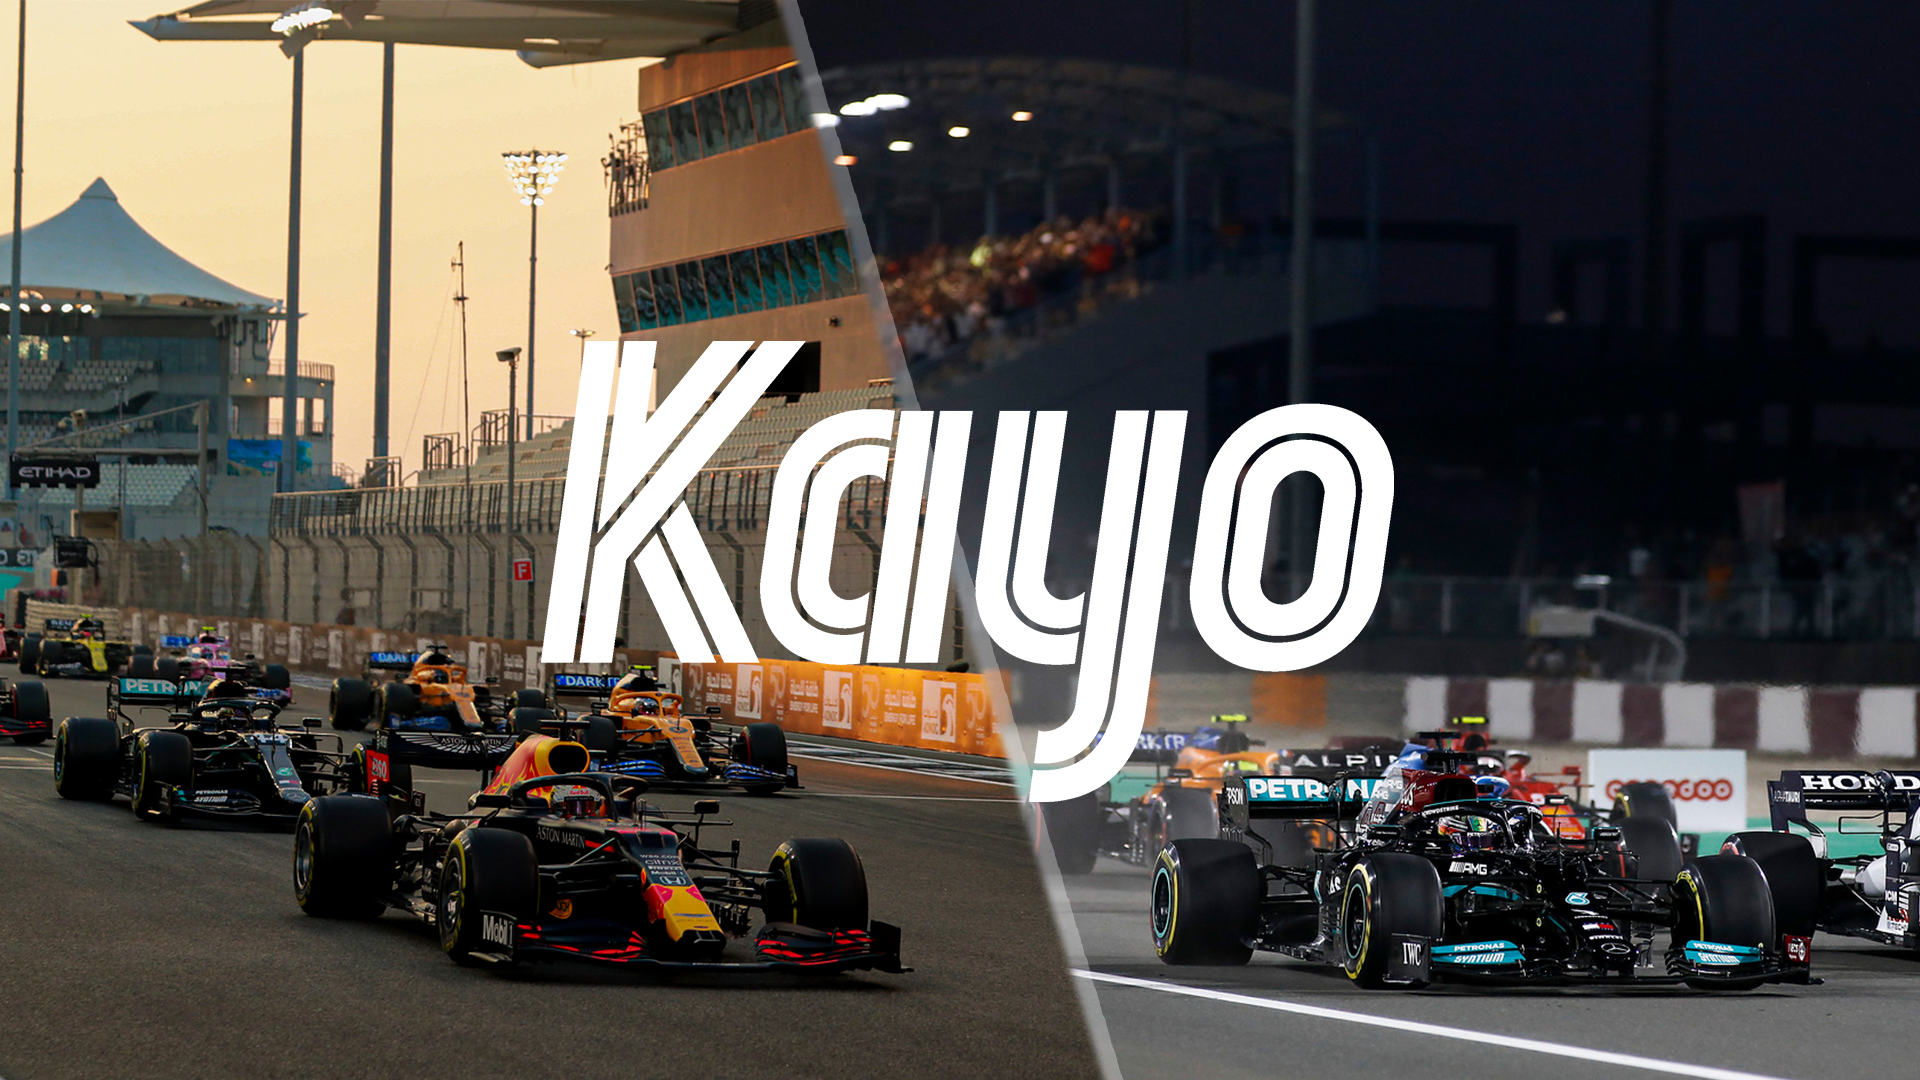 Watch the rest of the F1 season for $5 on Kayo Sports